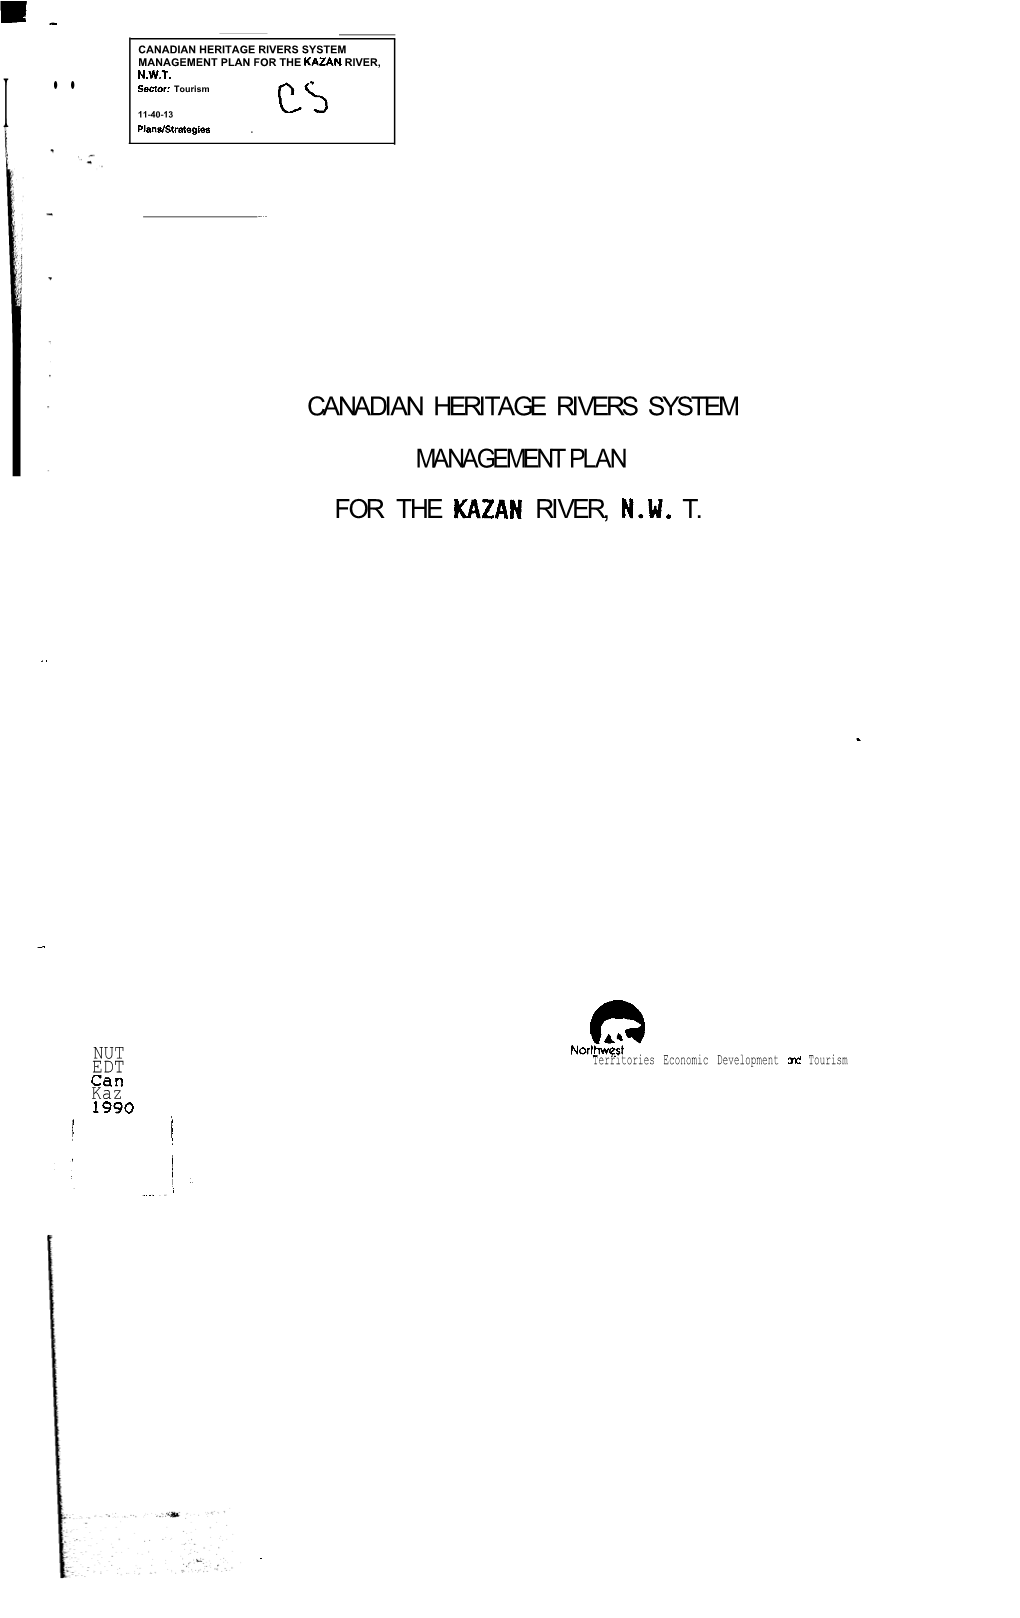 Canadian Heritage Rivers System Management Plan for the Kazan River, N.W.T